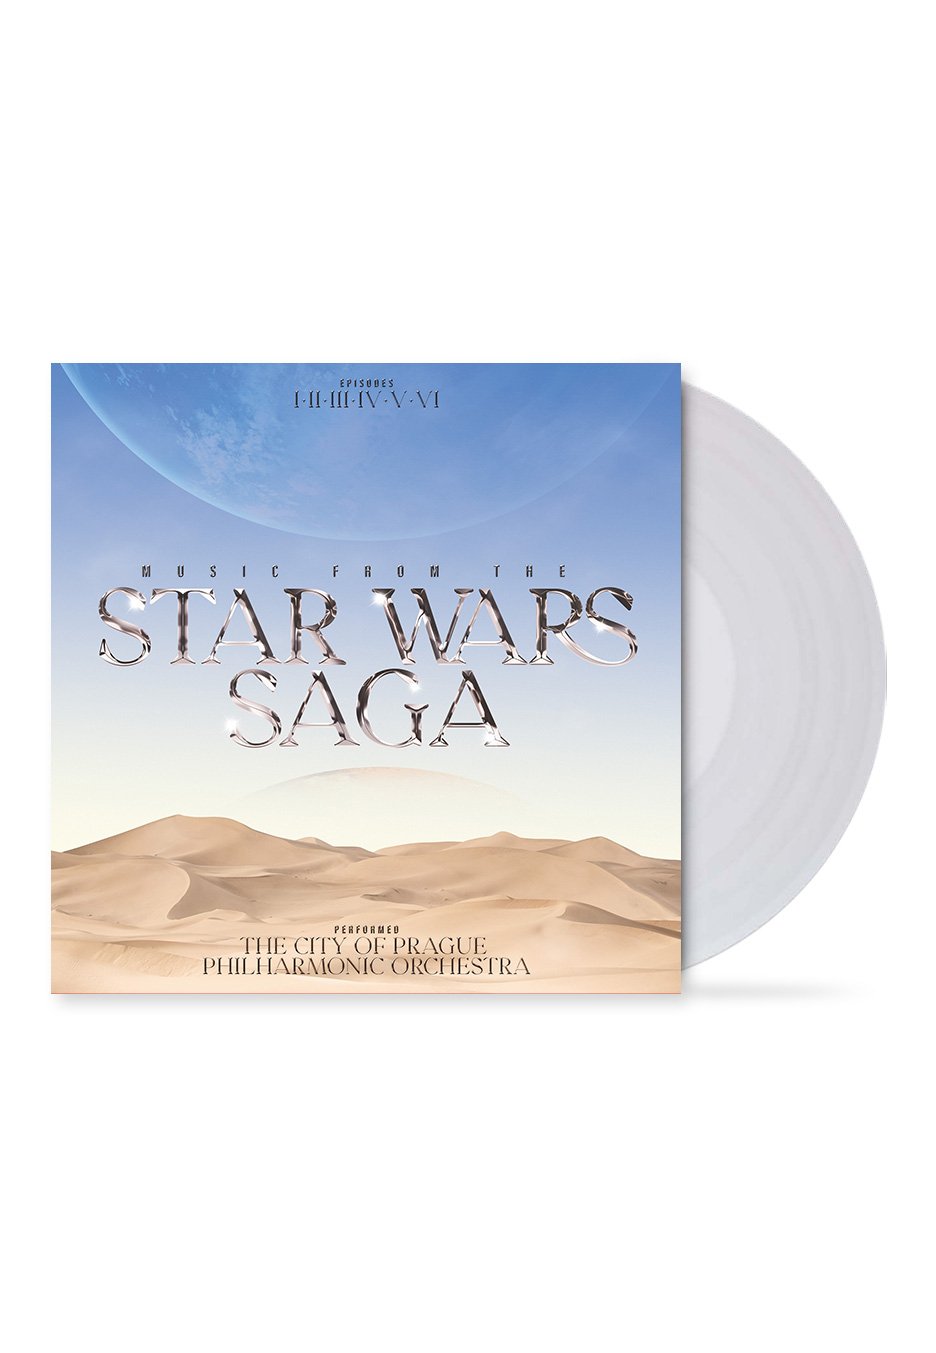 Star Wars - Music From The Star Wars Saga (The City Of Prague Philharmonic Orchestra) Clear - Colored Vinyl 